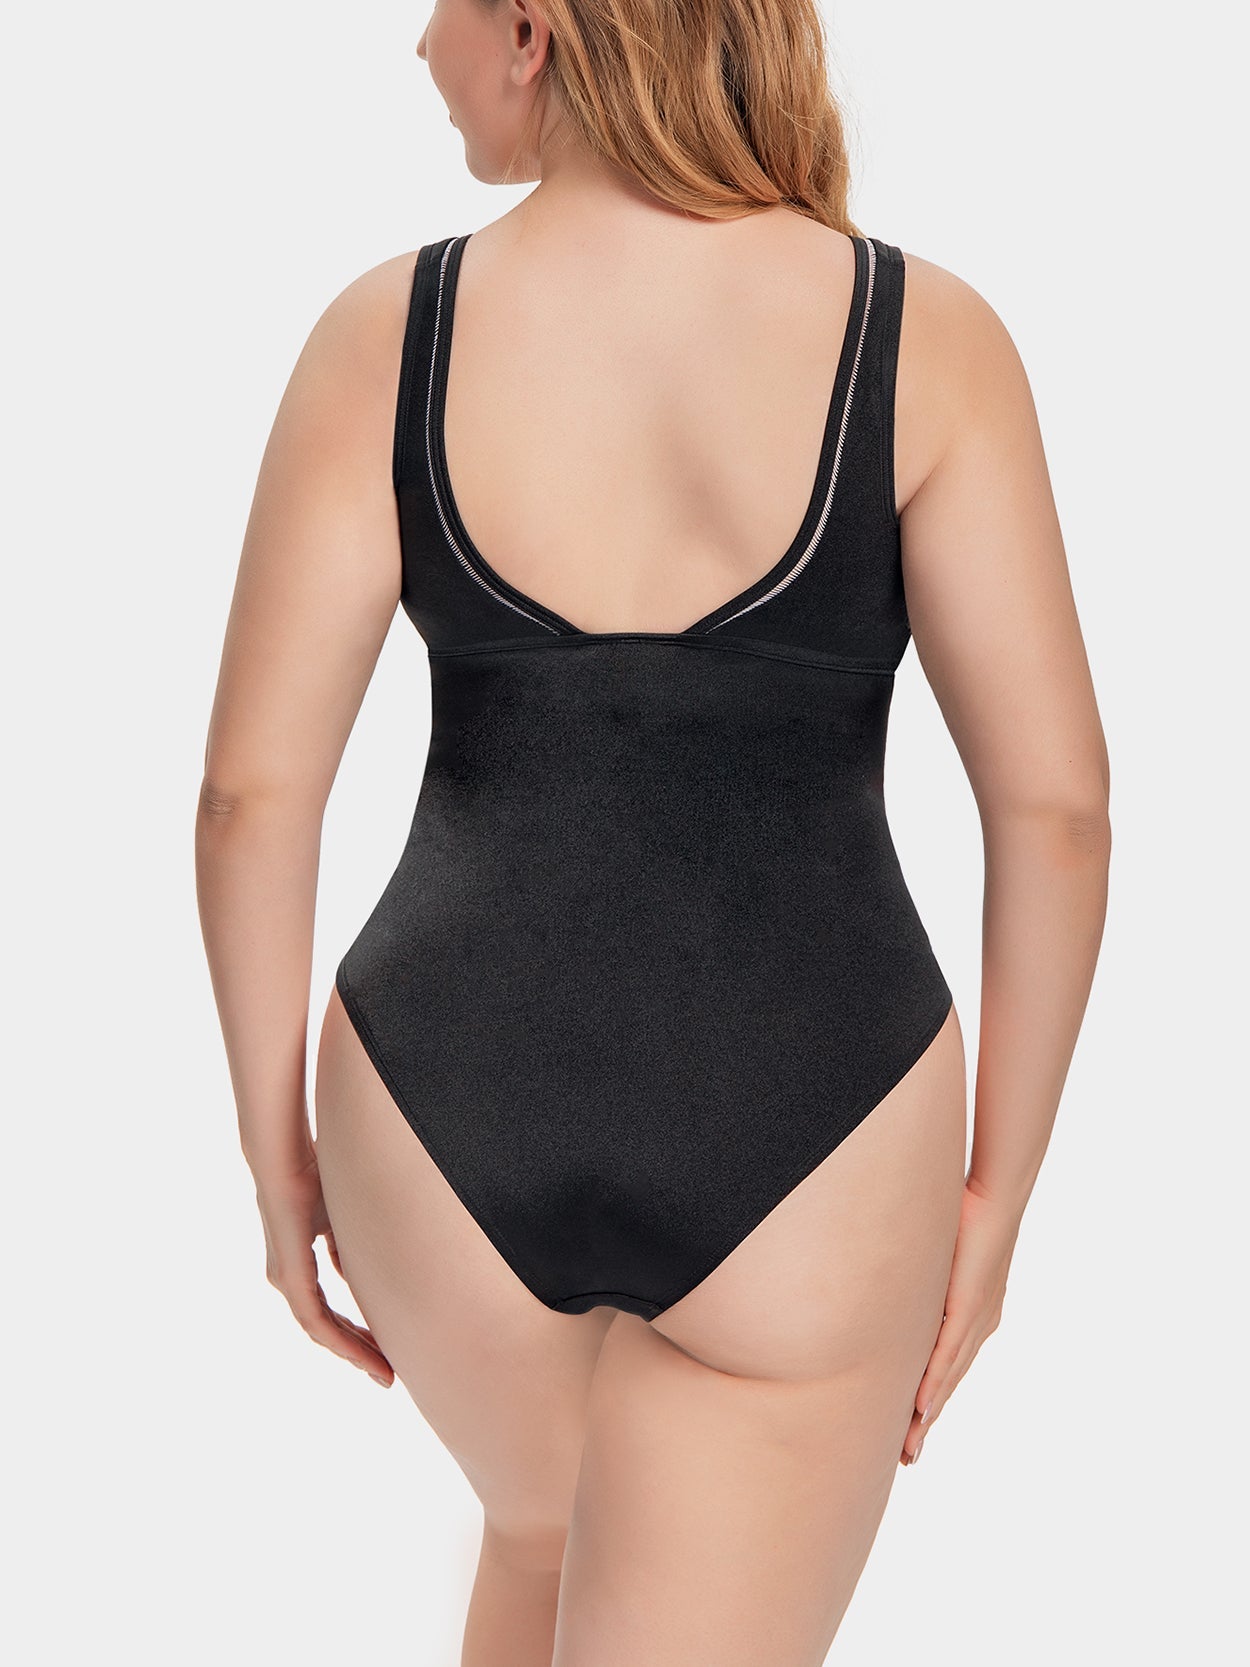 Women's Plus Size One Piece Swimsuits Bathing Suits For Women Sexy